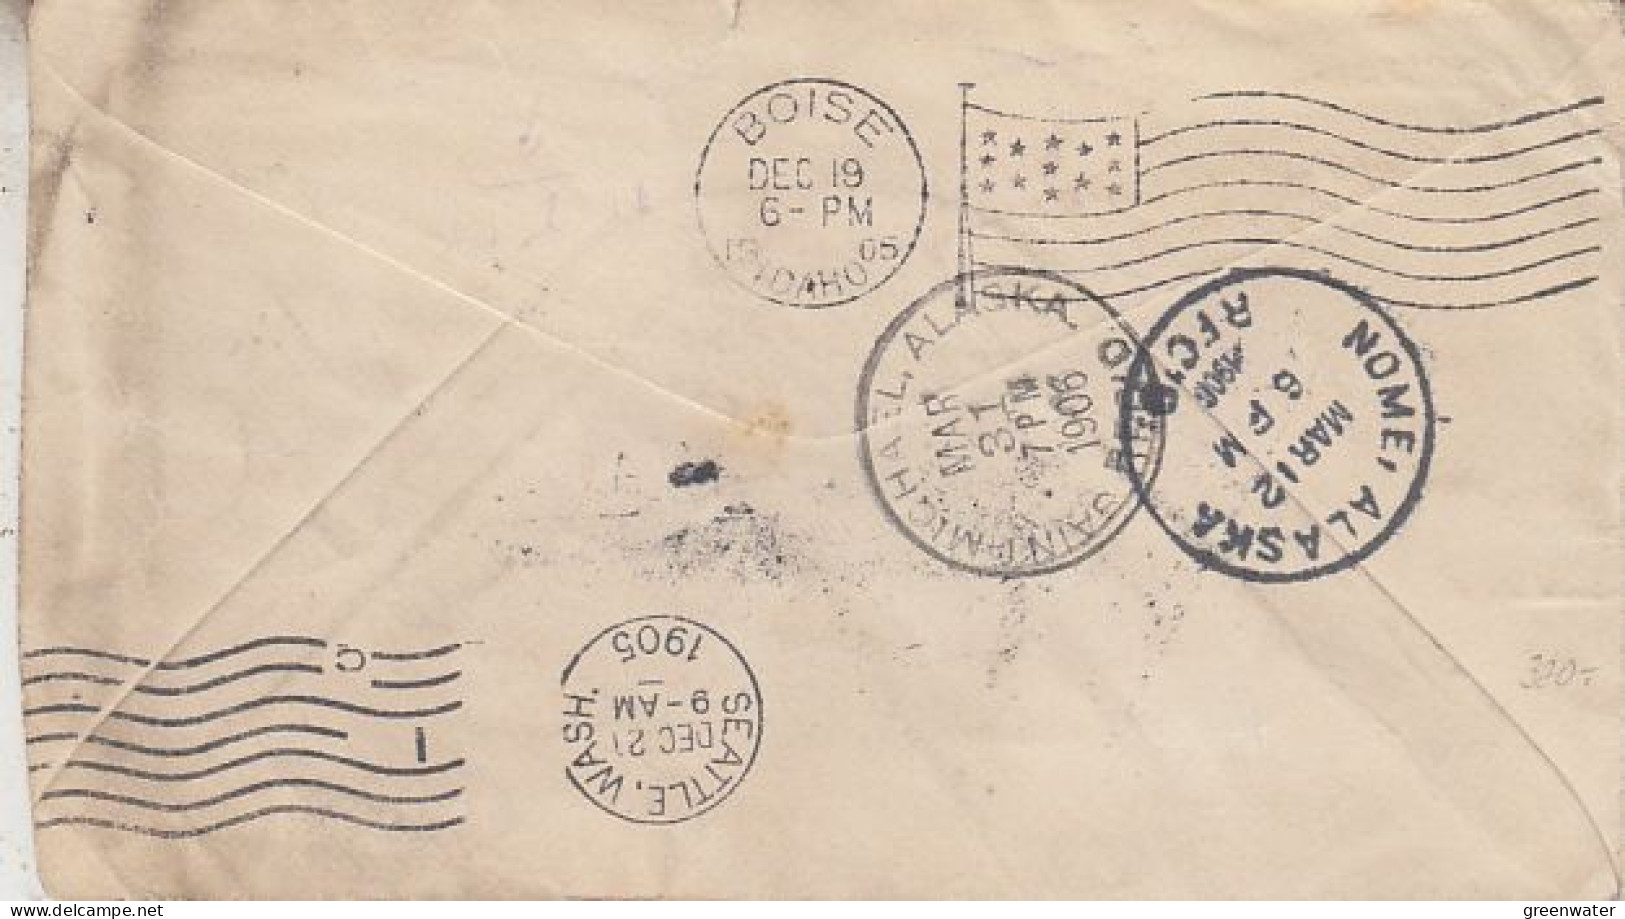 Alaska / Yukon 5 winter mail covers being transported in parts by Dog Sled (59862)